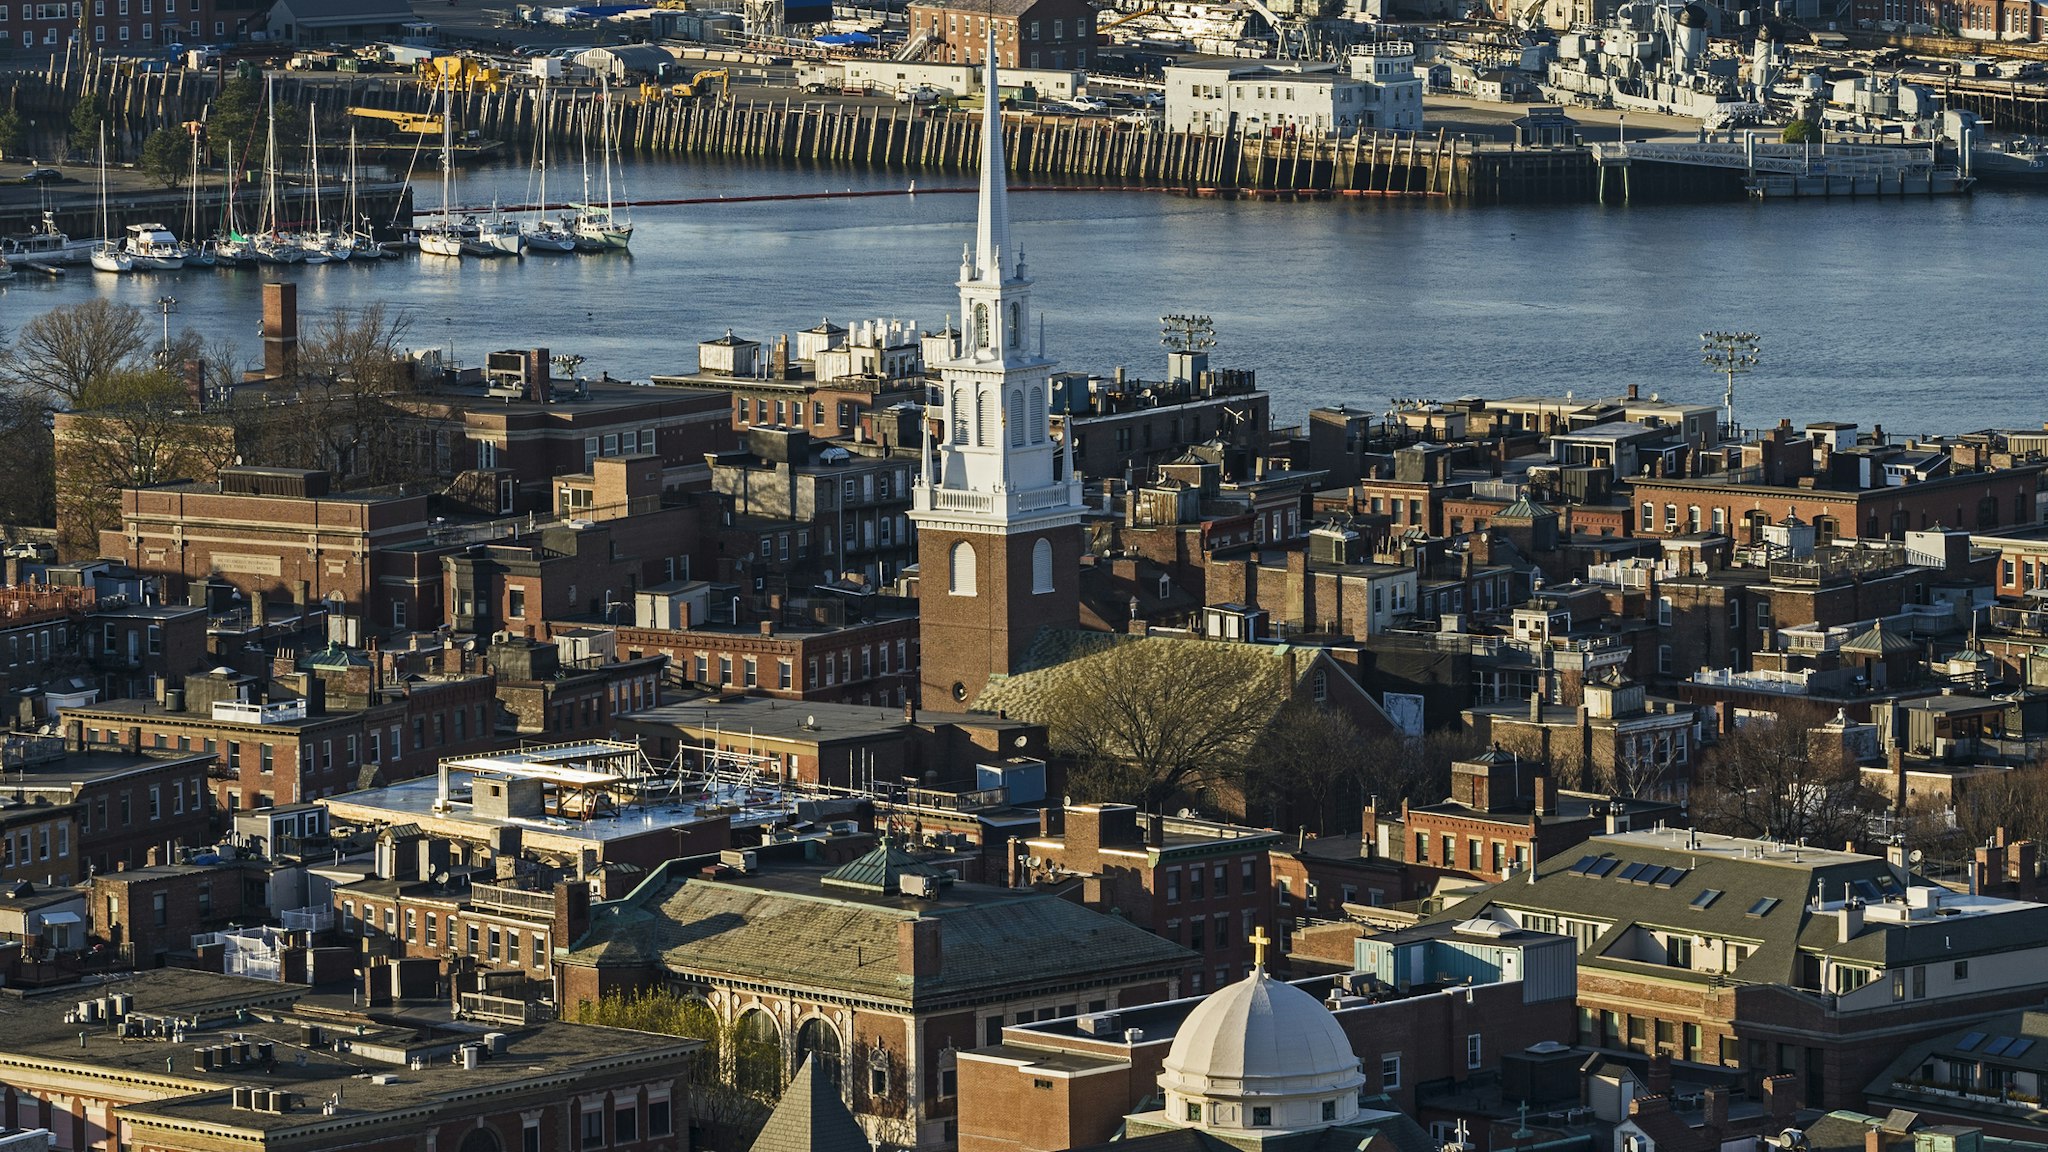 Massachusetts, Boston, Aerial view of North End and Charlestown areas - stock photo